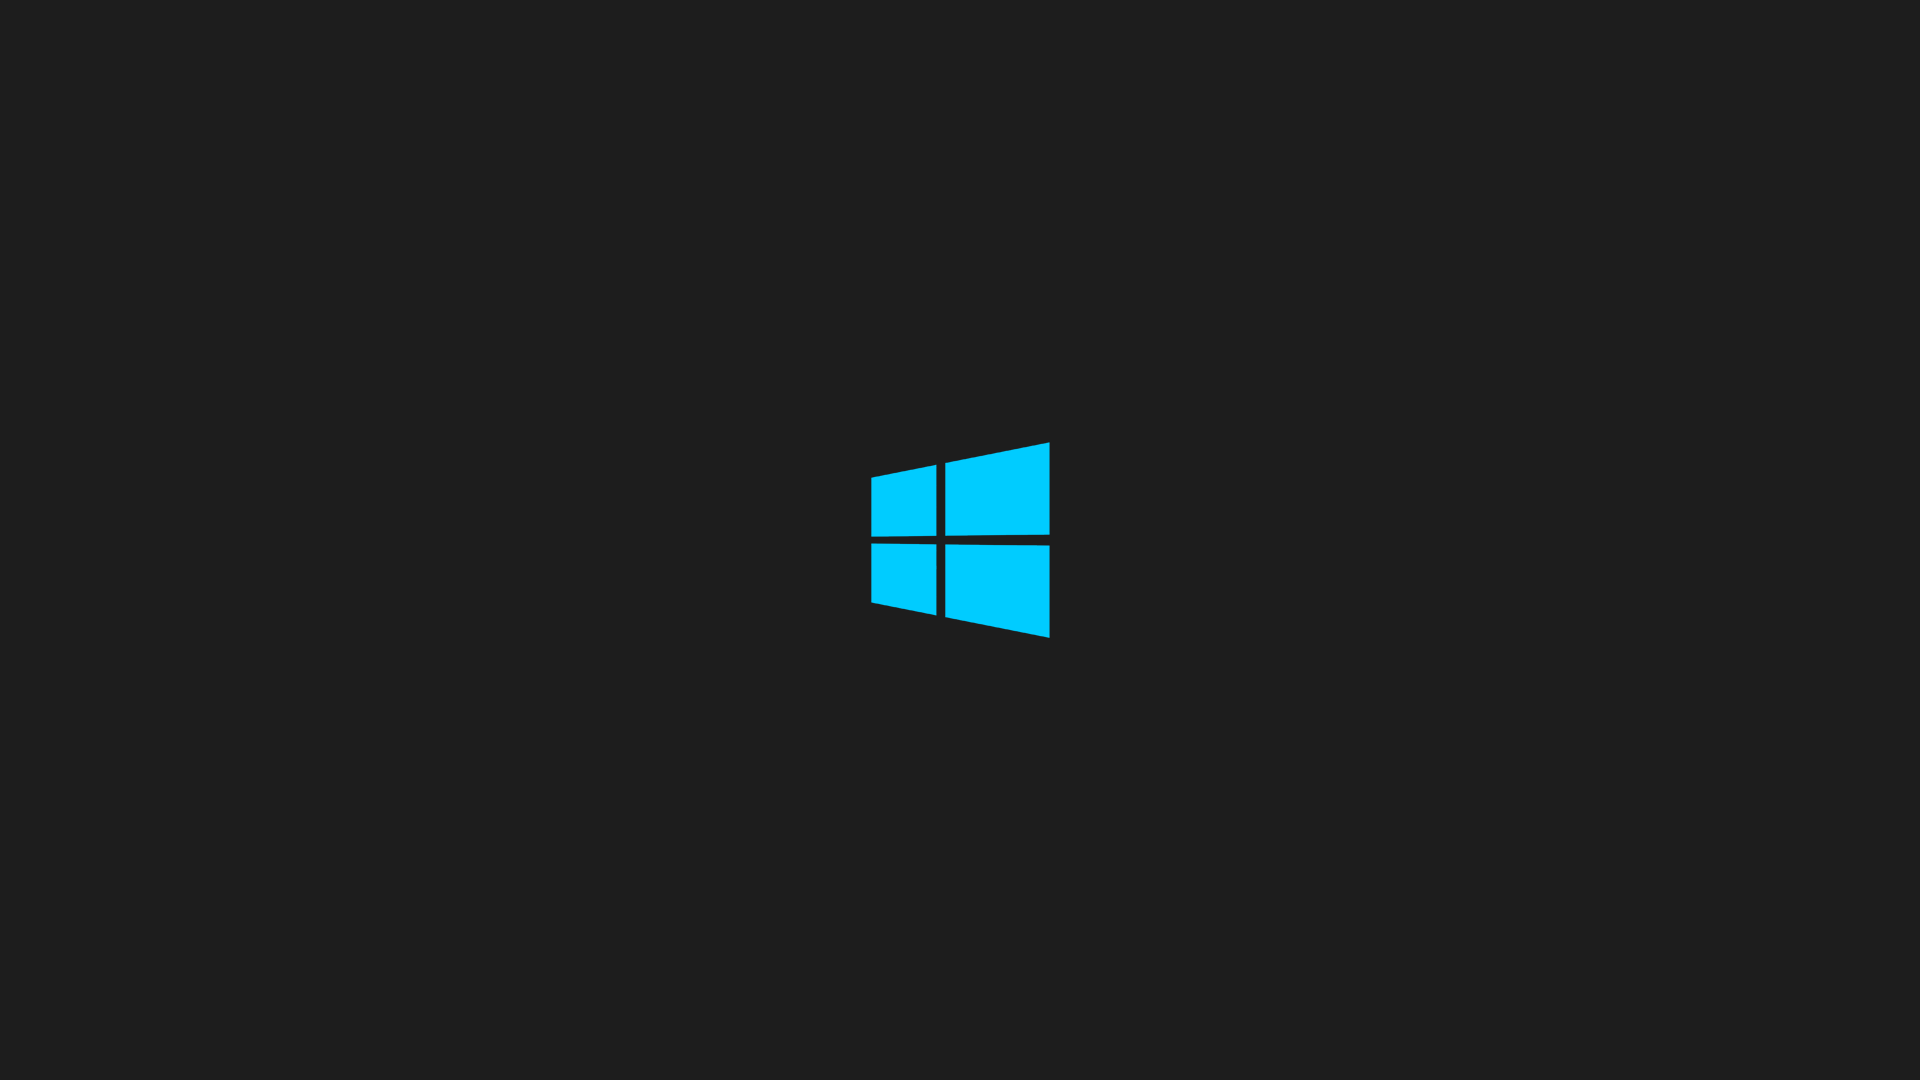 Black Windows 8 Wallpaper « Android Wallpapers 2016